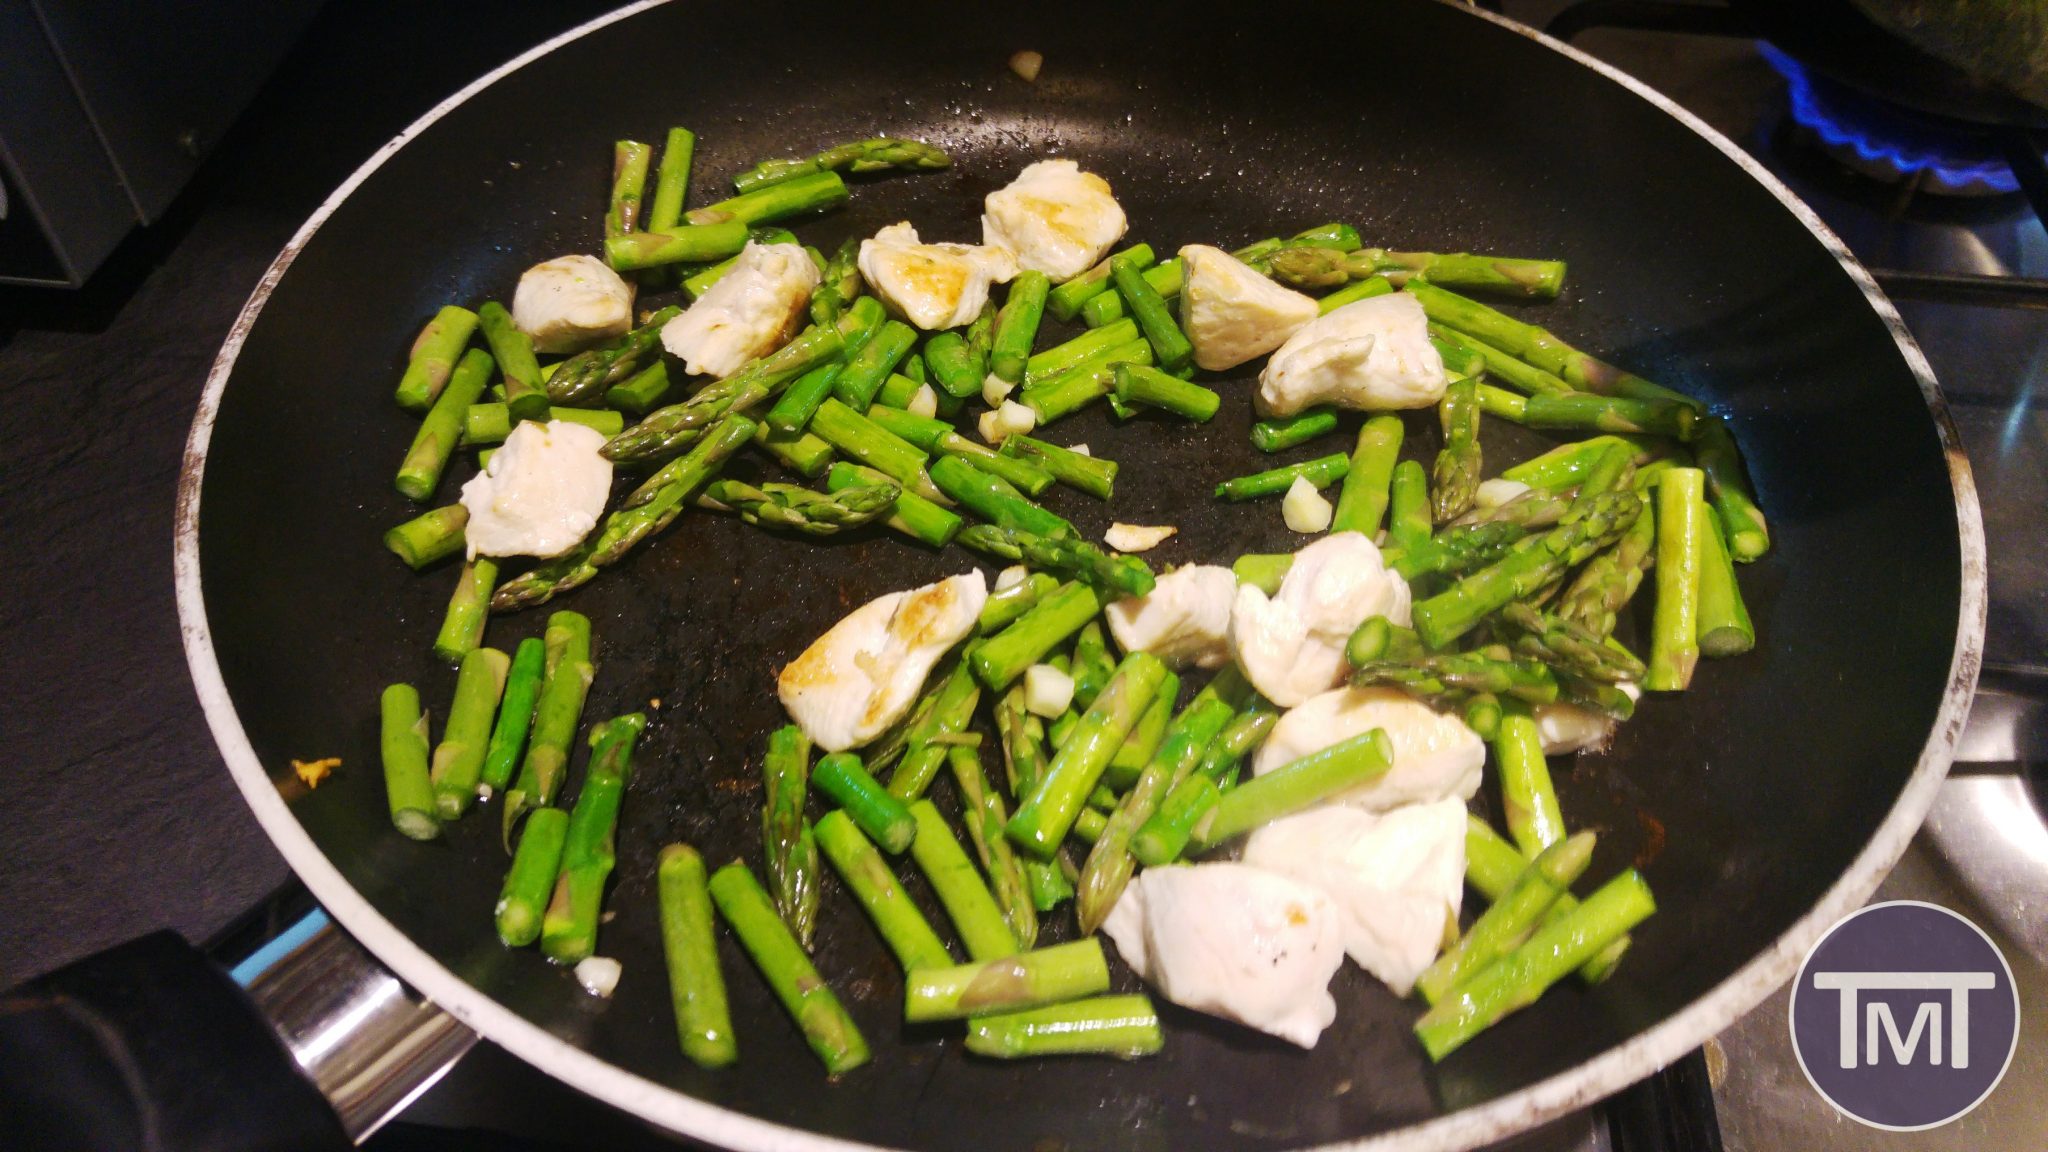 Clean Eating garlic, chicken and asparagus noodles, perfect meal prep idea with minimal clean up. Really quick and easy!